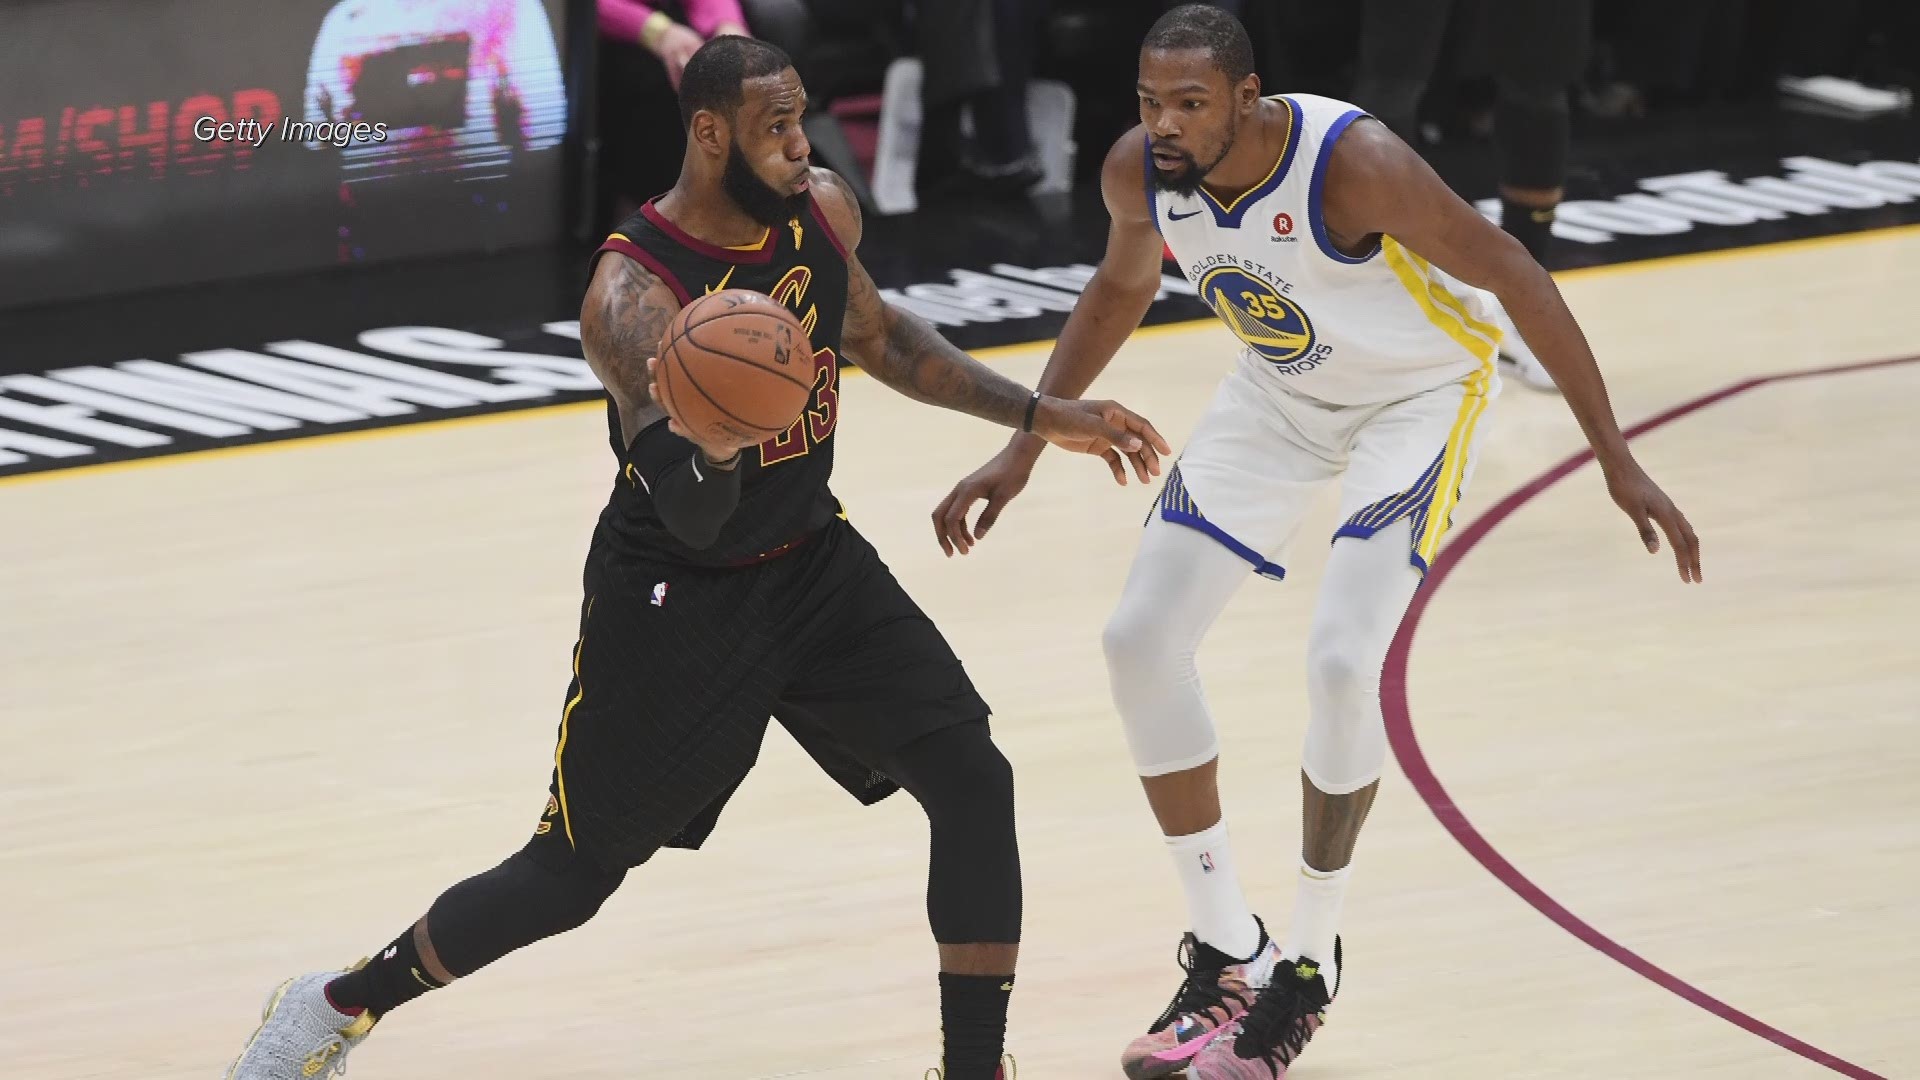 Kevin Durant said he doesn't think LeBron James will take his talents to the Warriors.